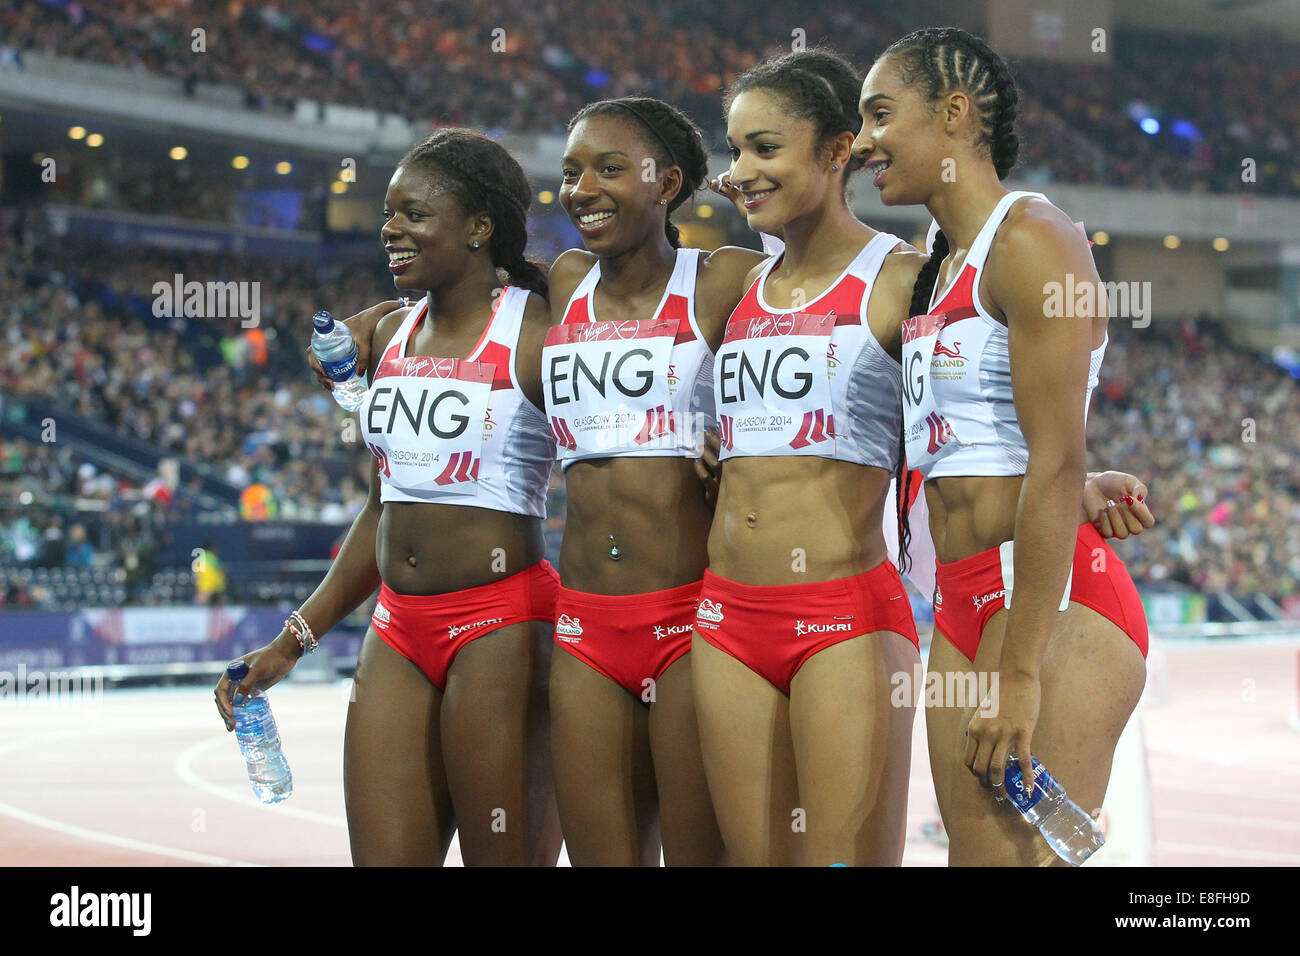 Asha Philip, Bianca Williams, Jodie Williams and Ashleigh Nelson (all ENG). England Bronze Medal - Women's 4 x 100m Final. Athle Stock Photo